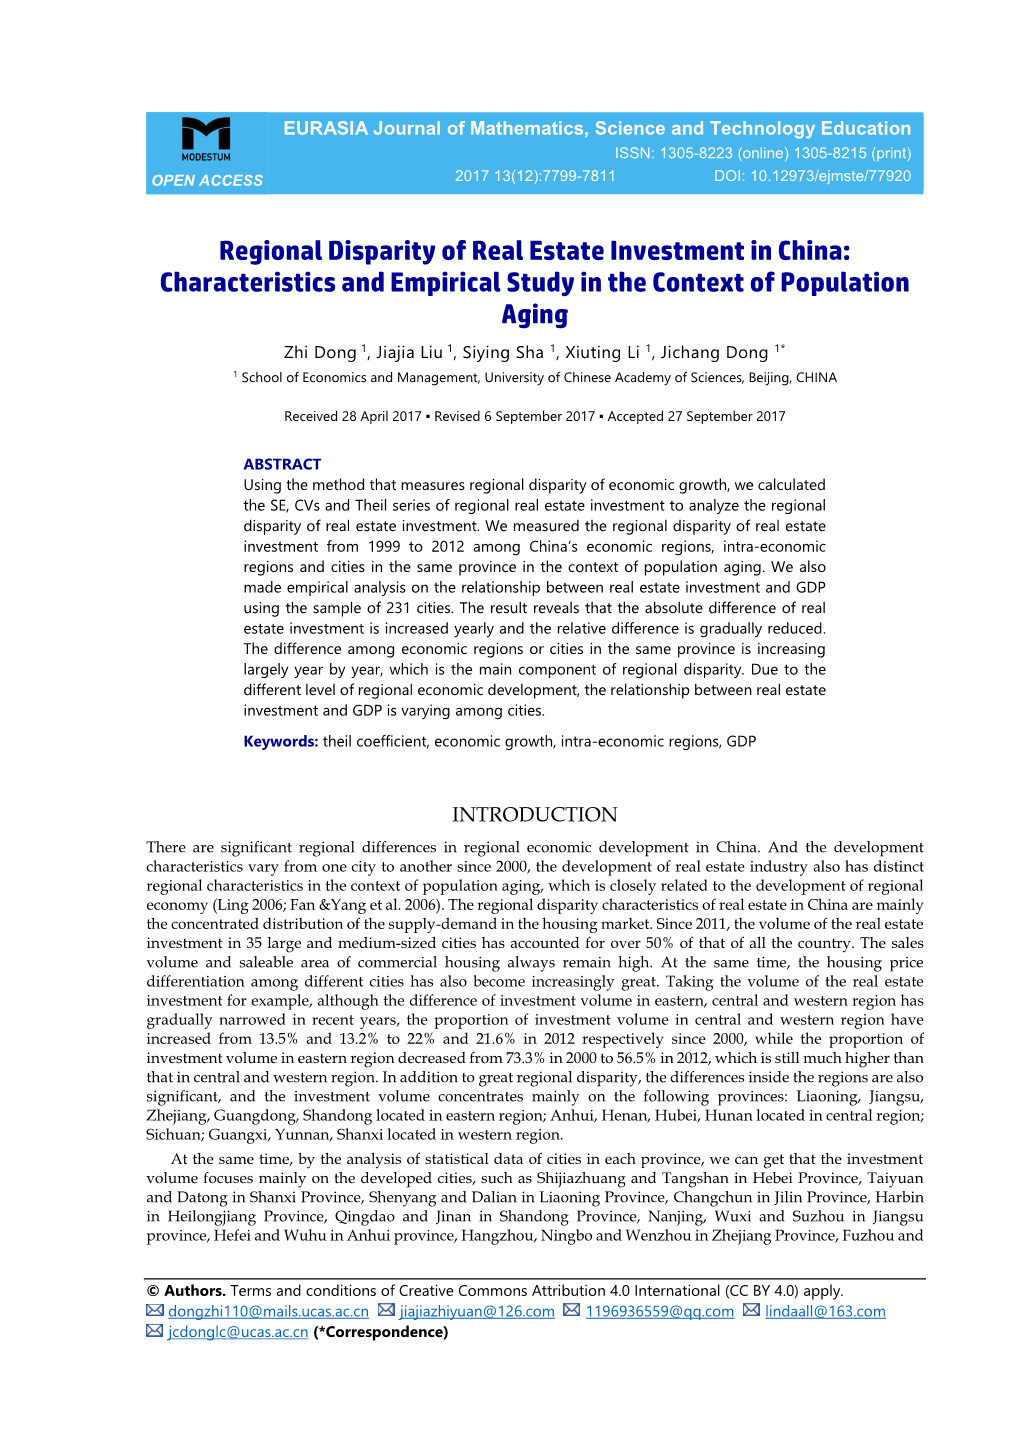 Regional Disparity of Real Estate Investment in China: Characteristics and Empirical Study in the Context of Population Aging